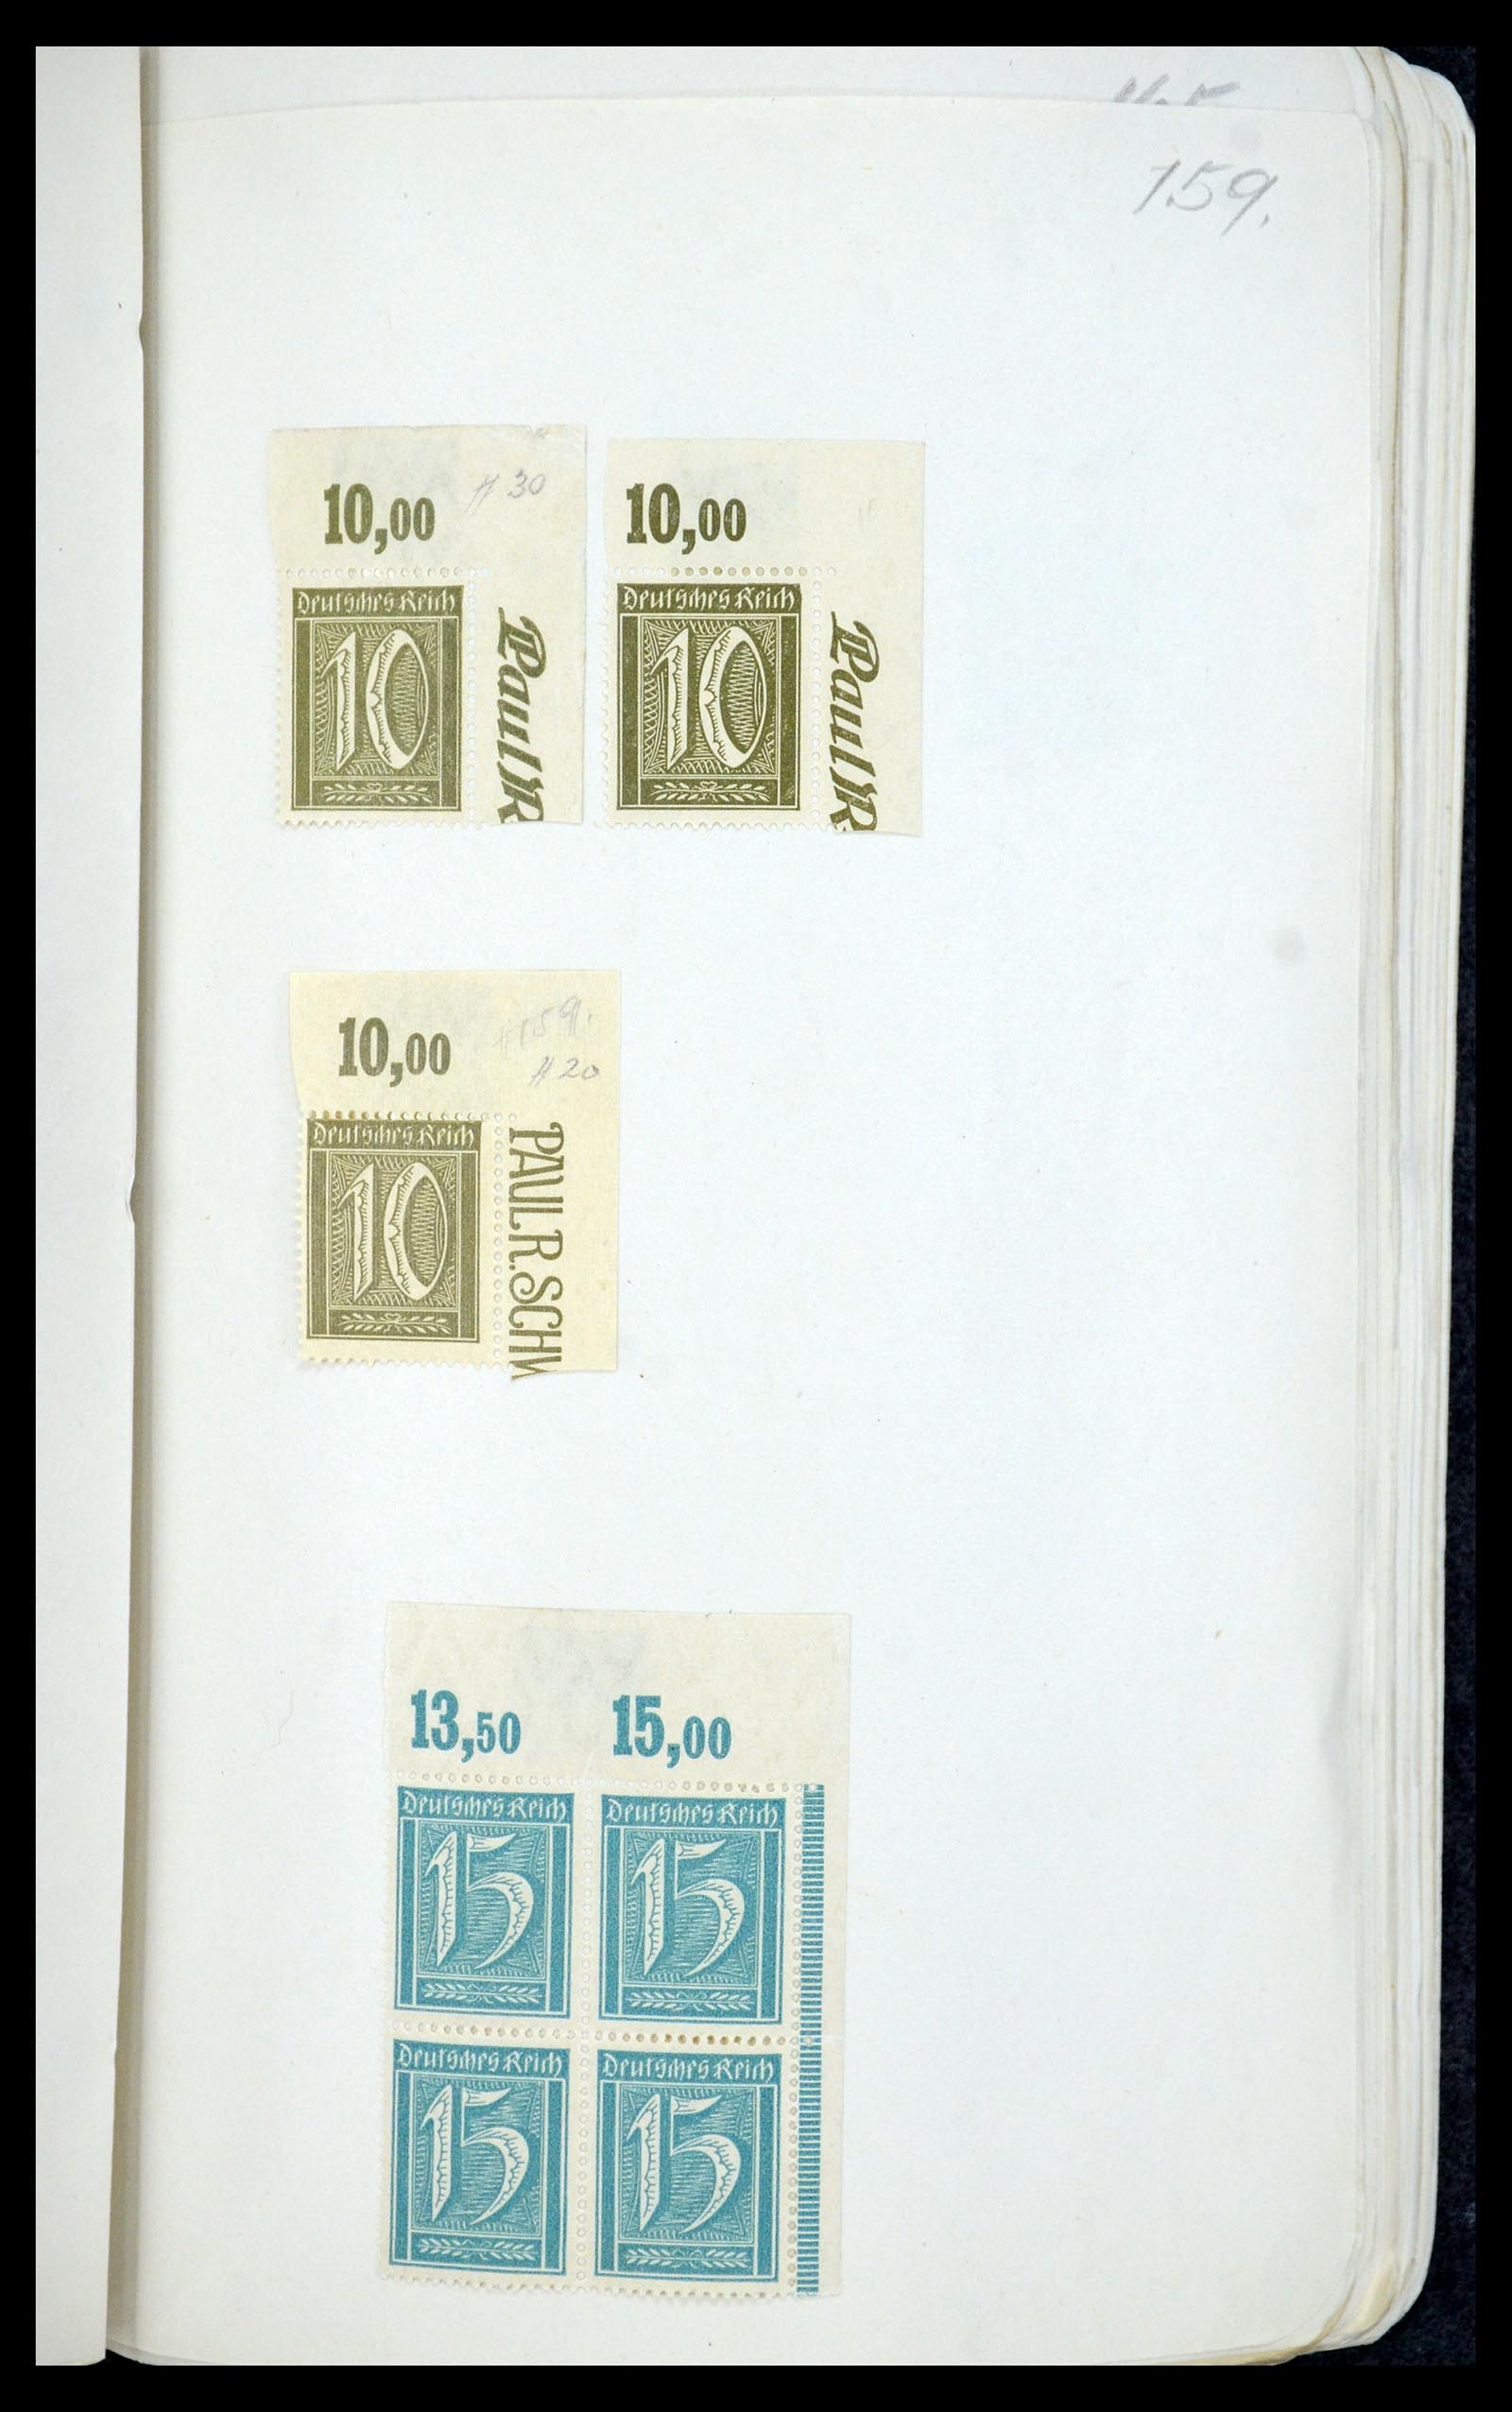 35565 046 - Stamp Collection 35565 German Reich infla 1919-1923.